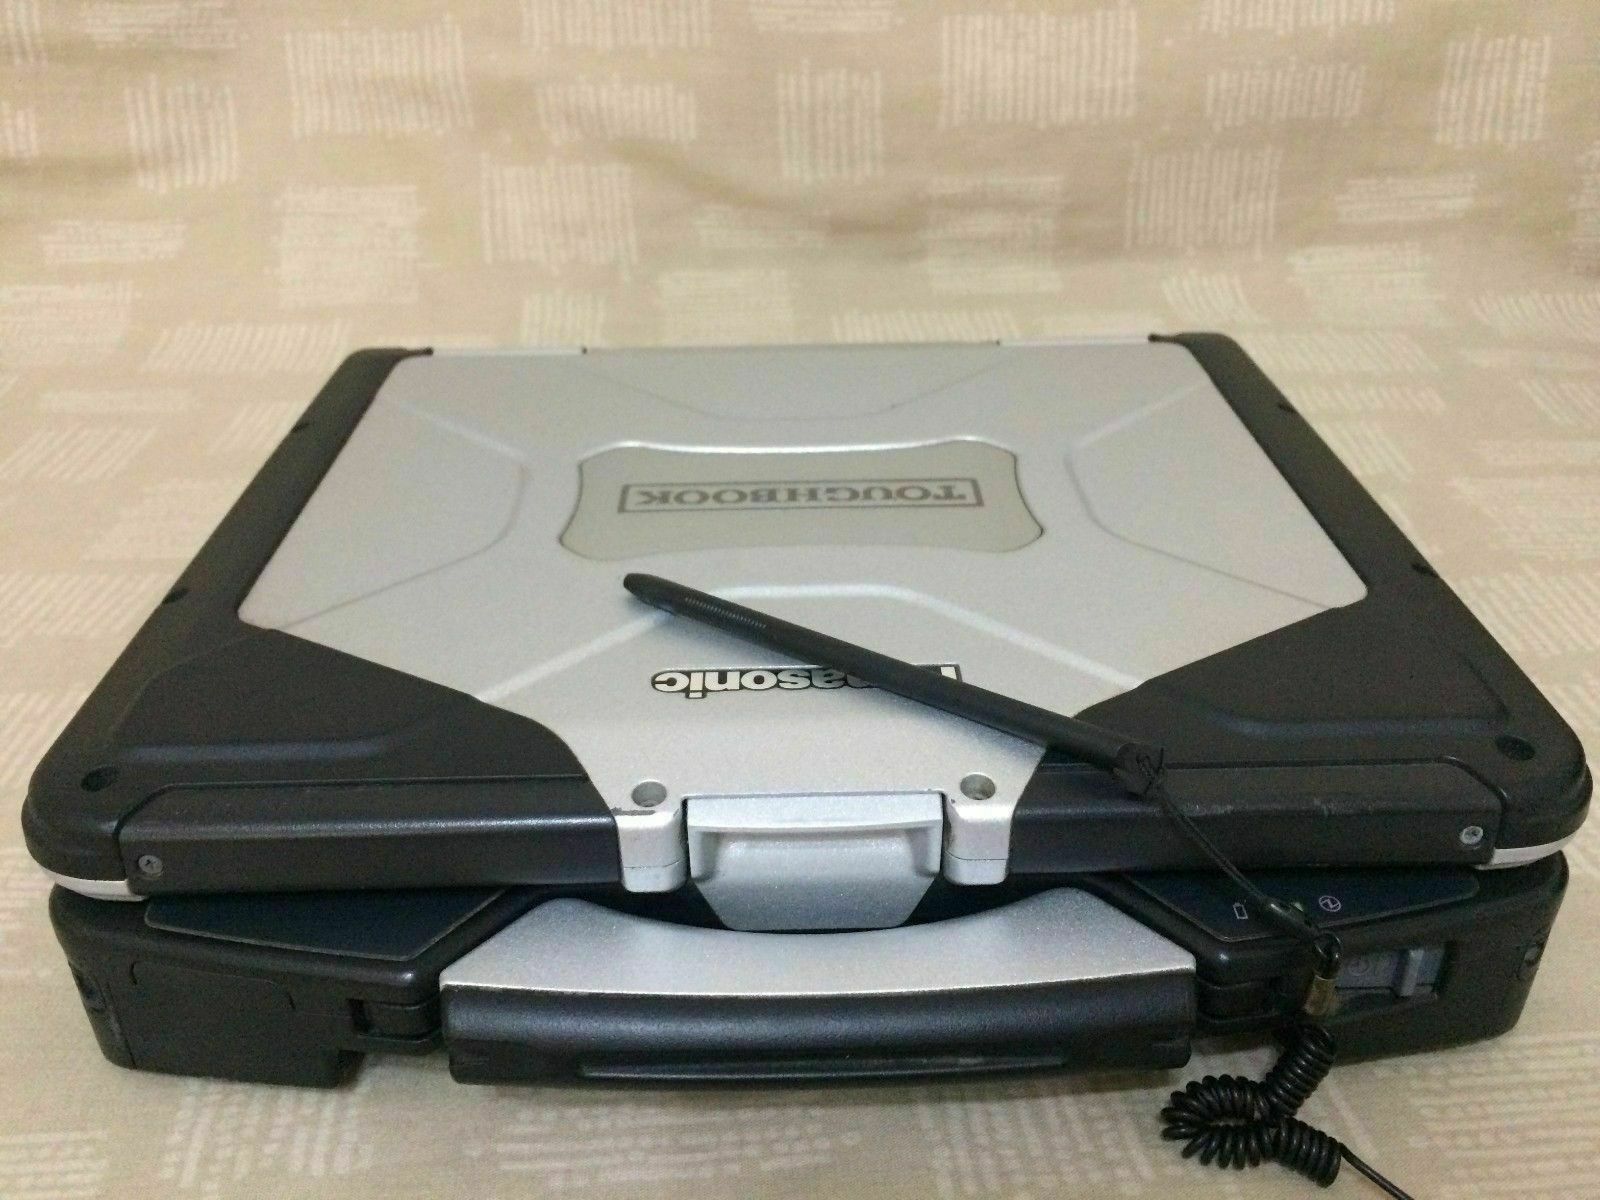 Used Panasonic Toughbook CF-31 MK4 Core i5 2.7ghz 8GB 500GB Rugged Win10 Serial Port - image 2 of 5